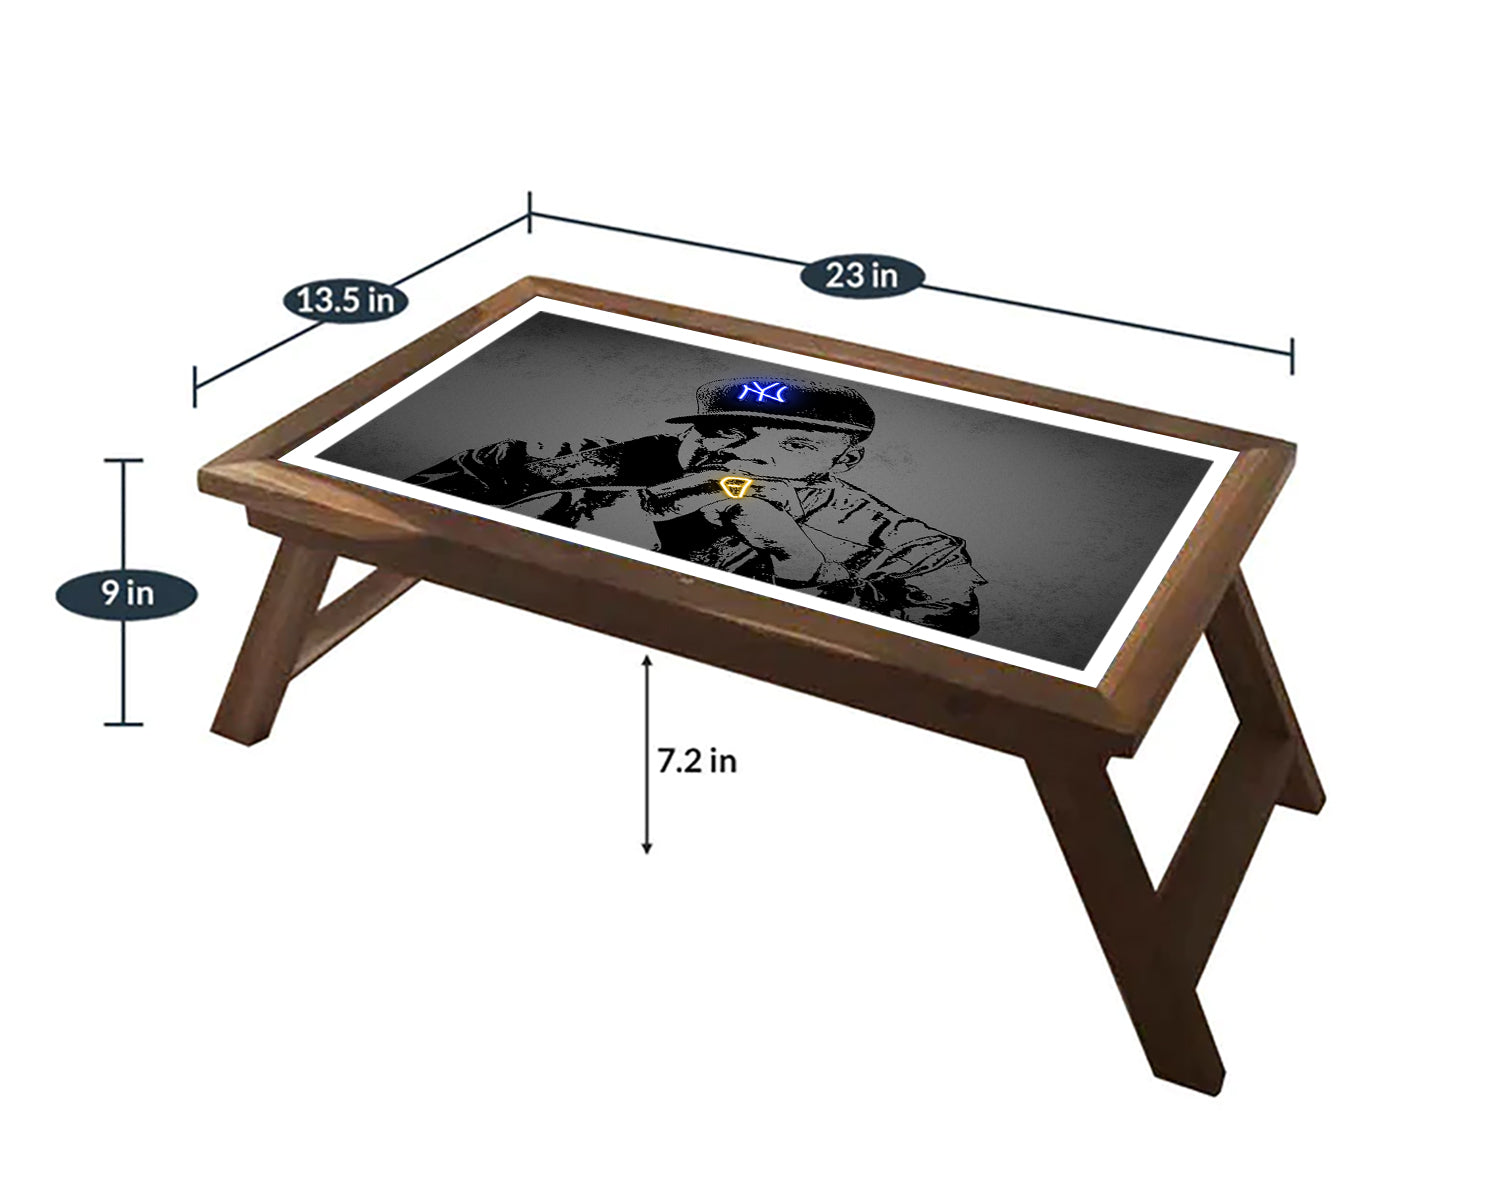 Jay z Neon Effect Coffee and Laptop Table 